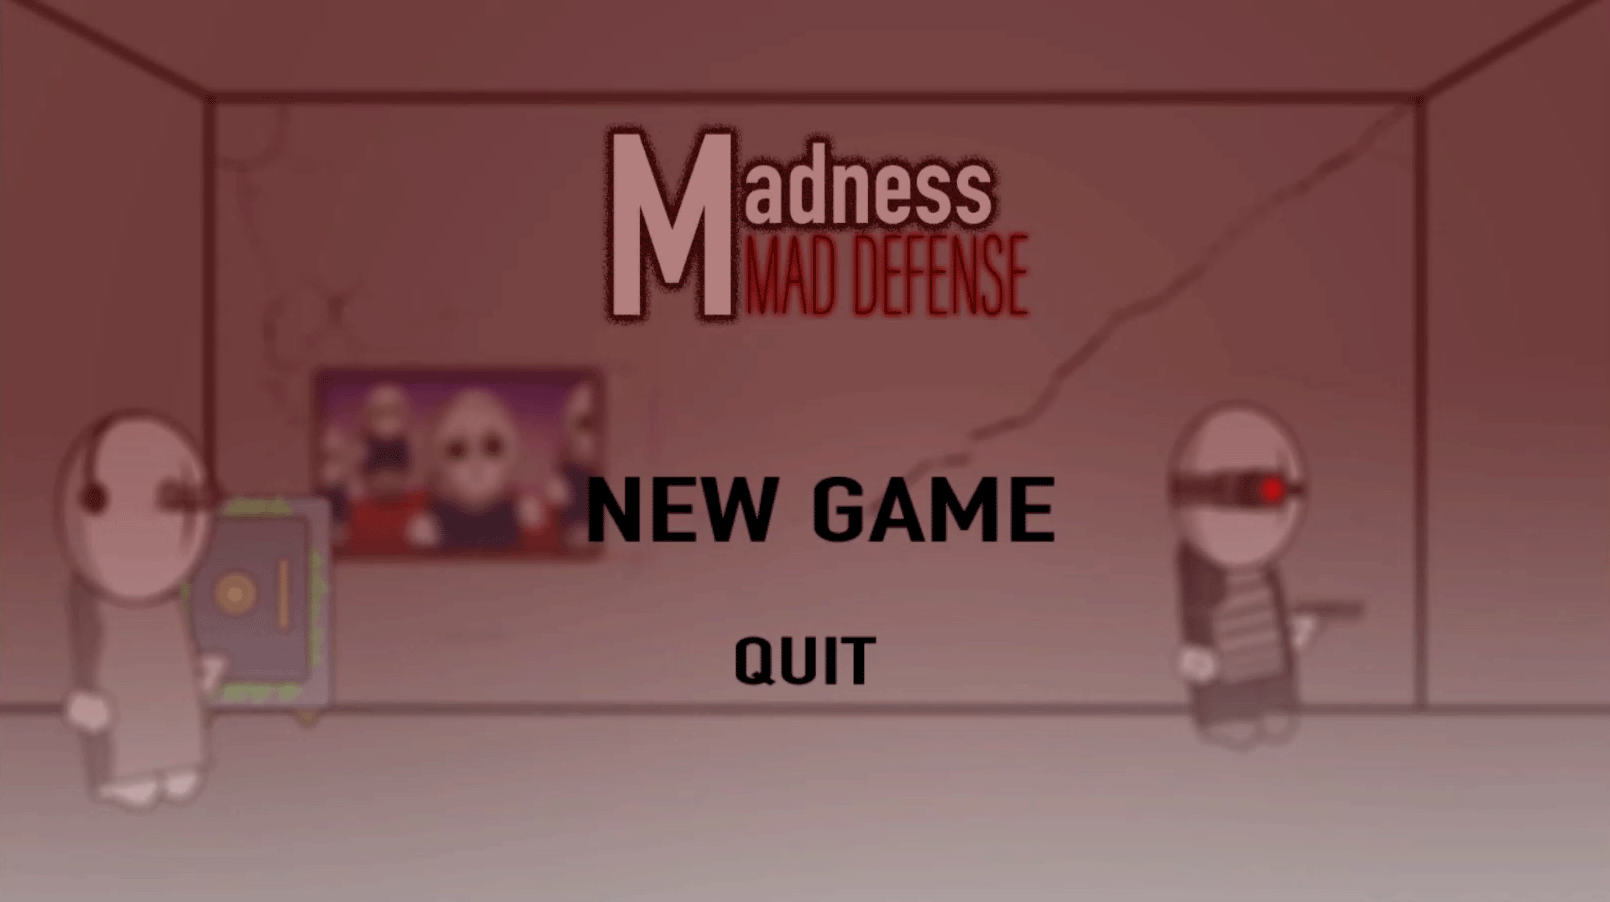 Madness - The Mad TowerDefense by RogueGiants